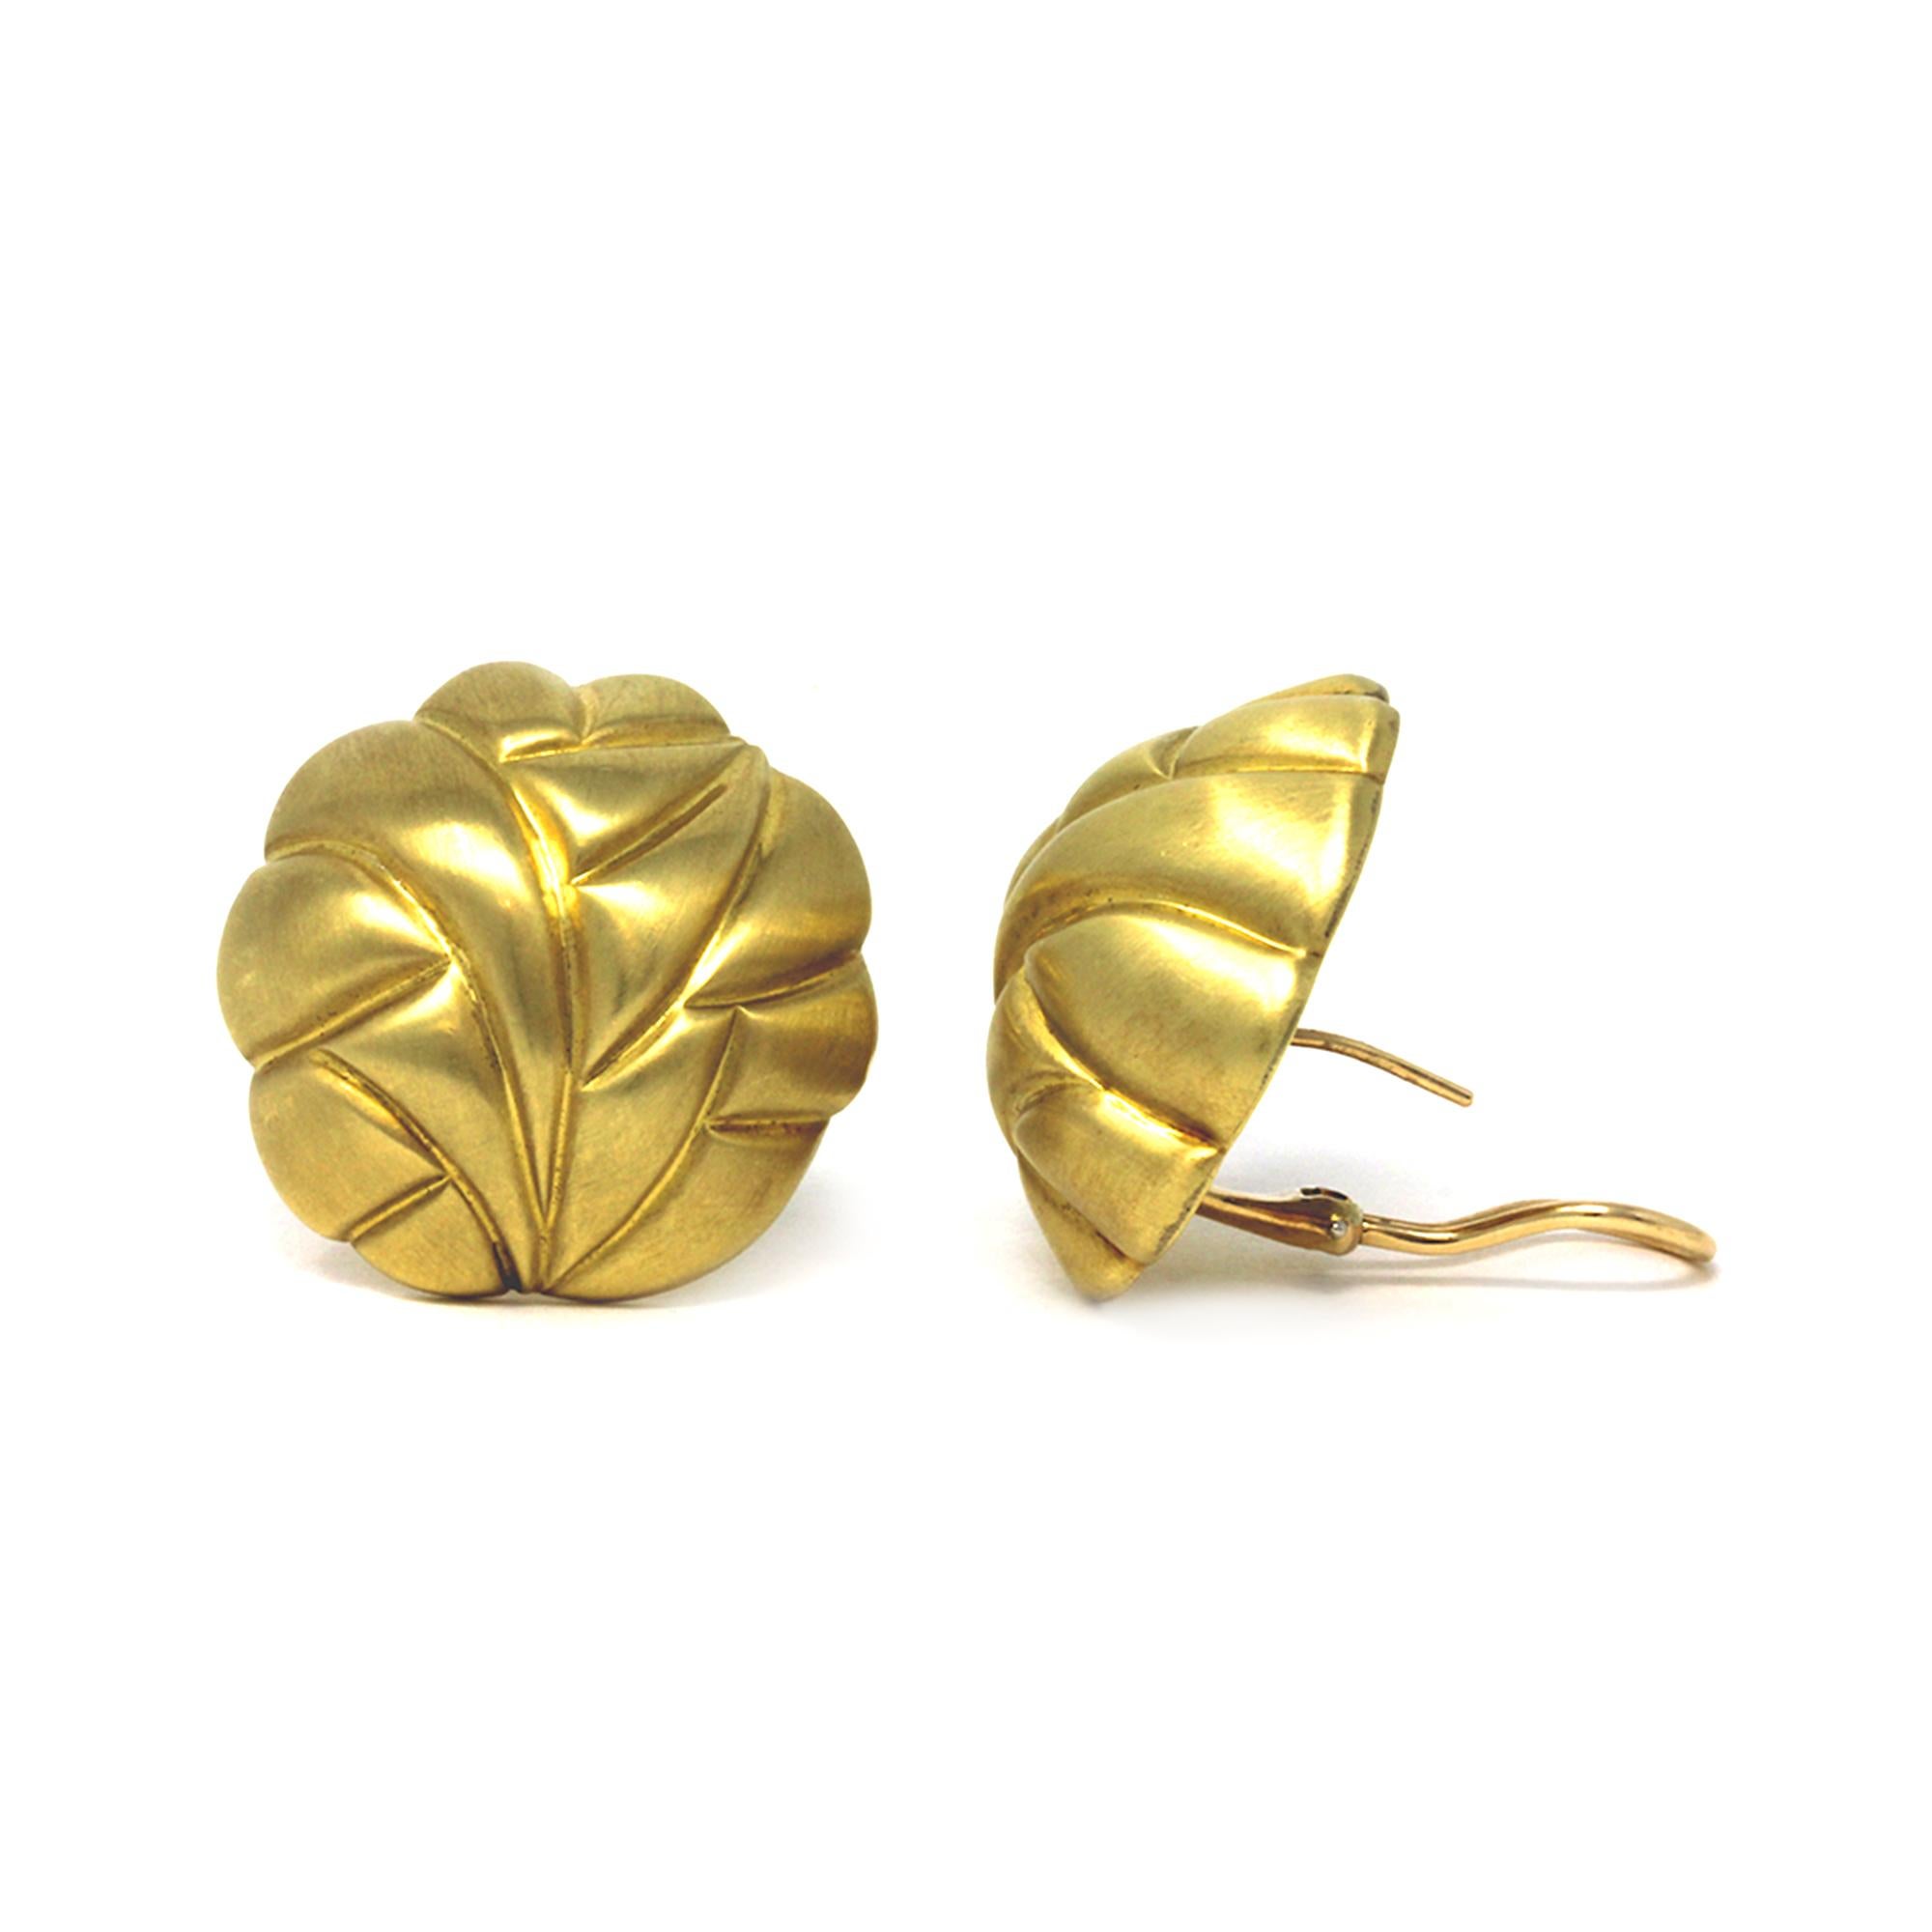 Pair of 18-karat yellow gold textured clip-on earrings of dome design with an abstract motif,
Brushed flat satin finish surface and high polish smooth inner face.
Gross weight 20.3 grams, measuring 1.13 inches in diameter and stamped 18k.
Omega